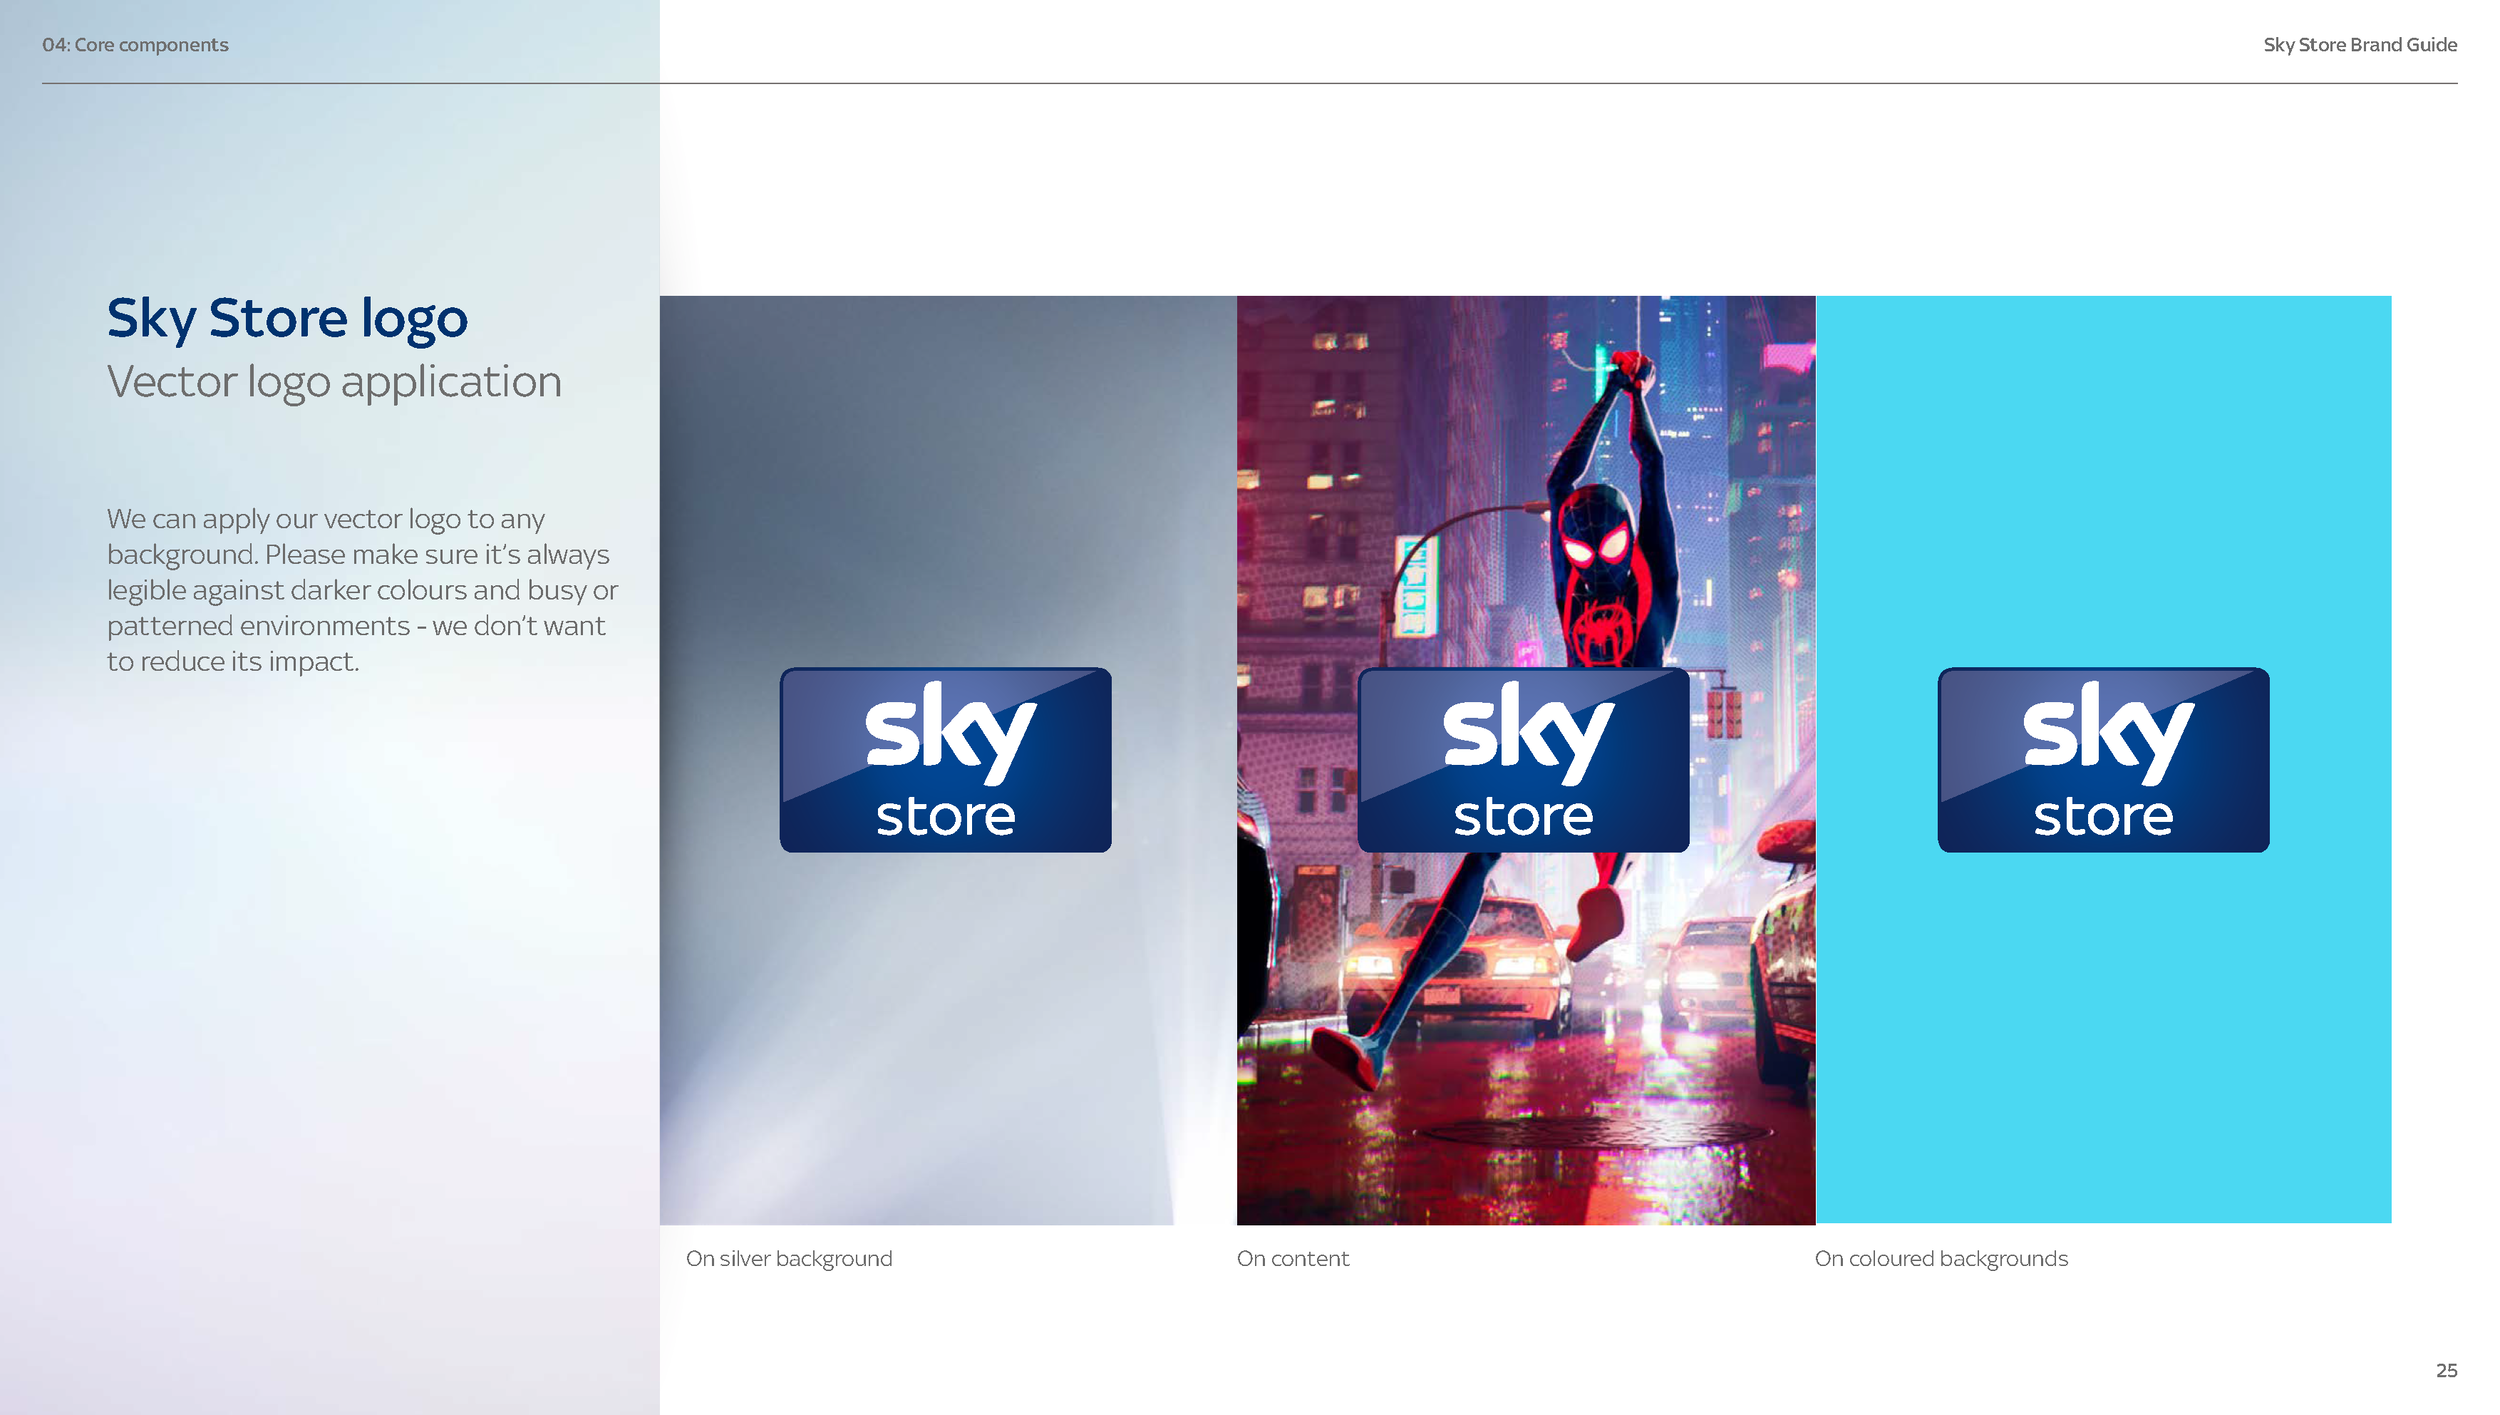 Sky_Store_Brand_Guide_STILL__Page_26.png